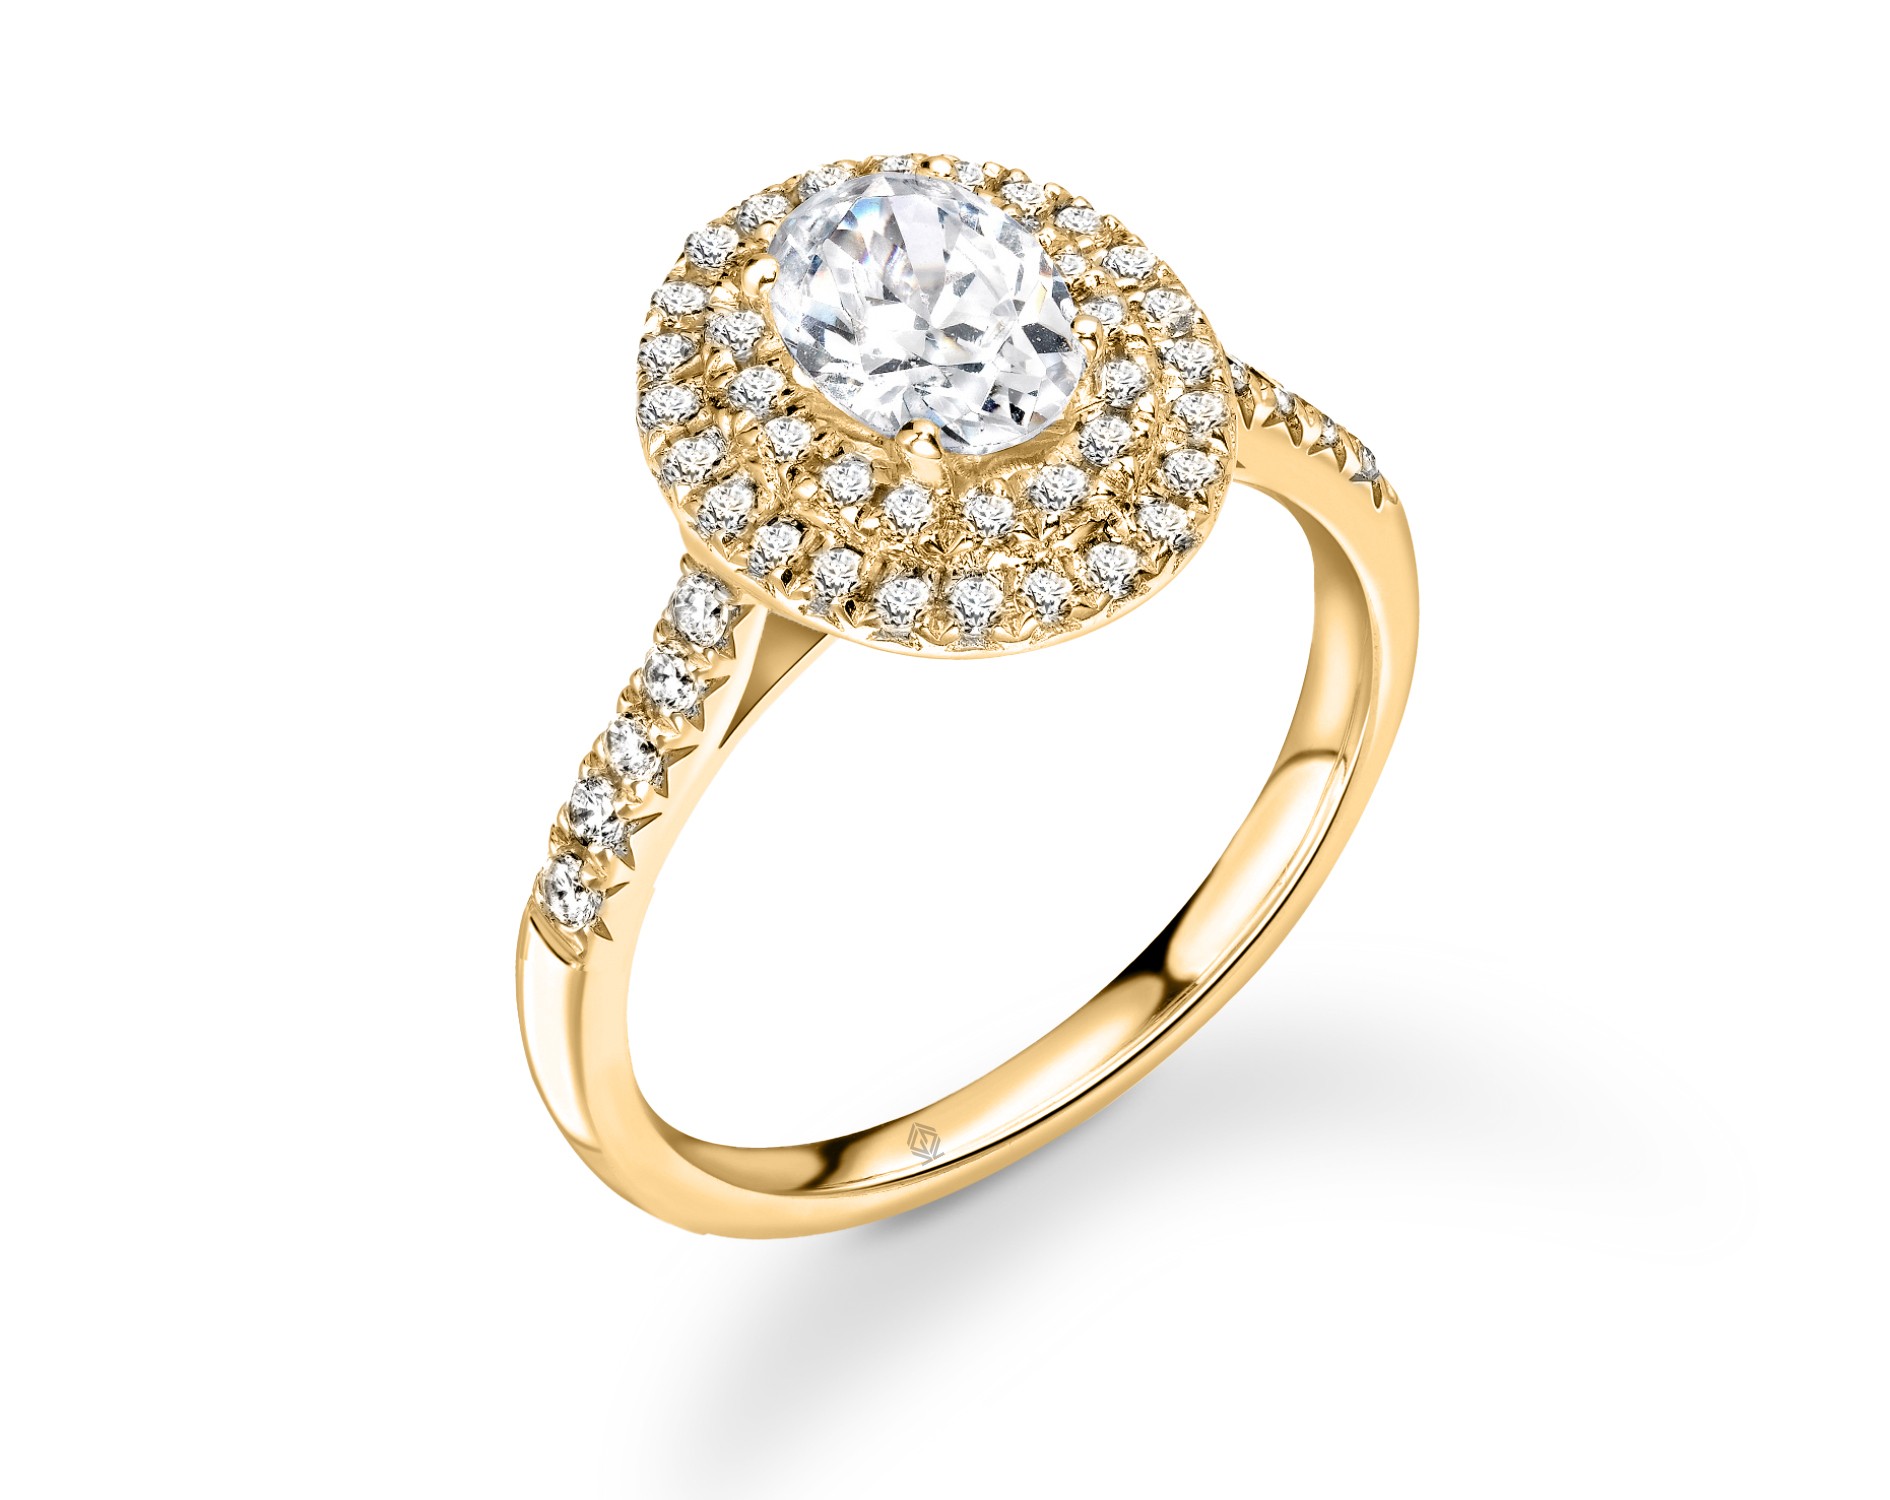 18K YELLOW GOLD DOUBLE HALO OVAL CUT DIAMOND ENGAGEMENT RING WITH SIDE STONES PAVE SET